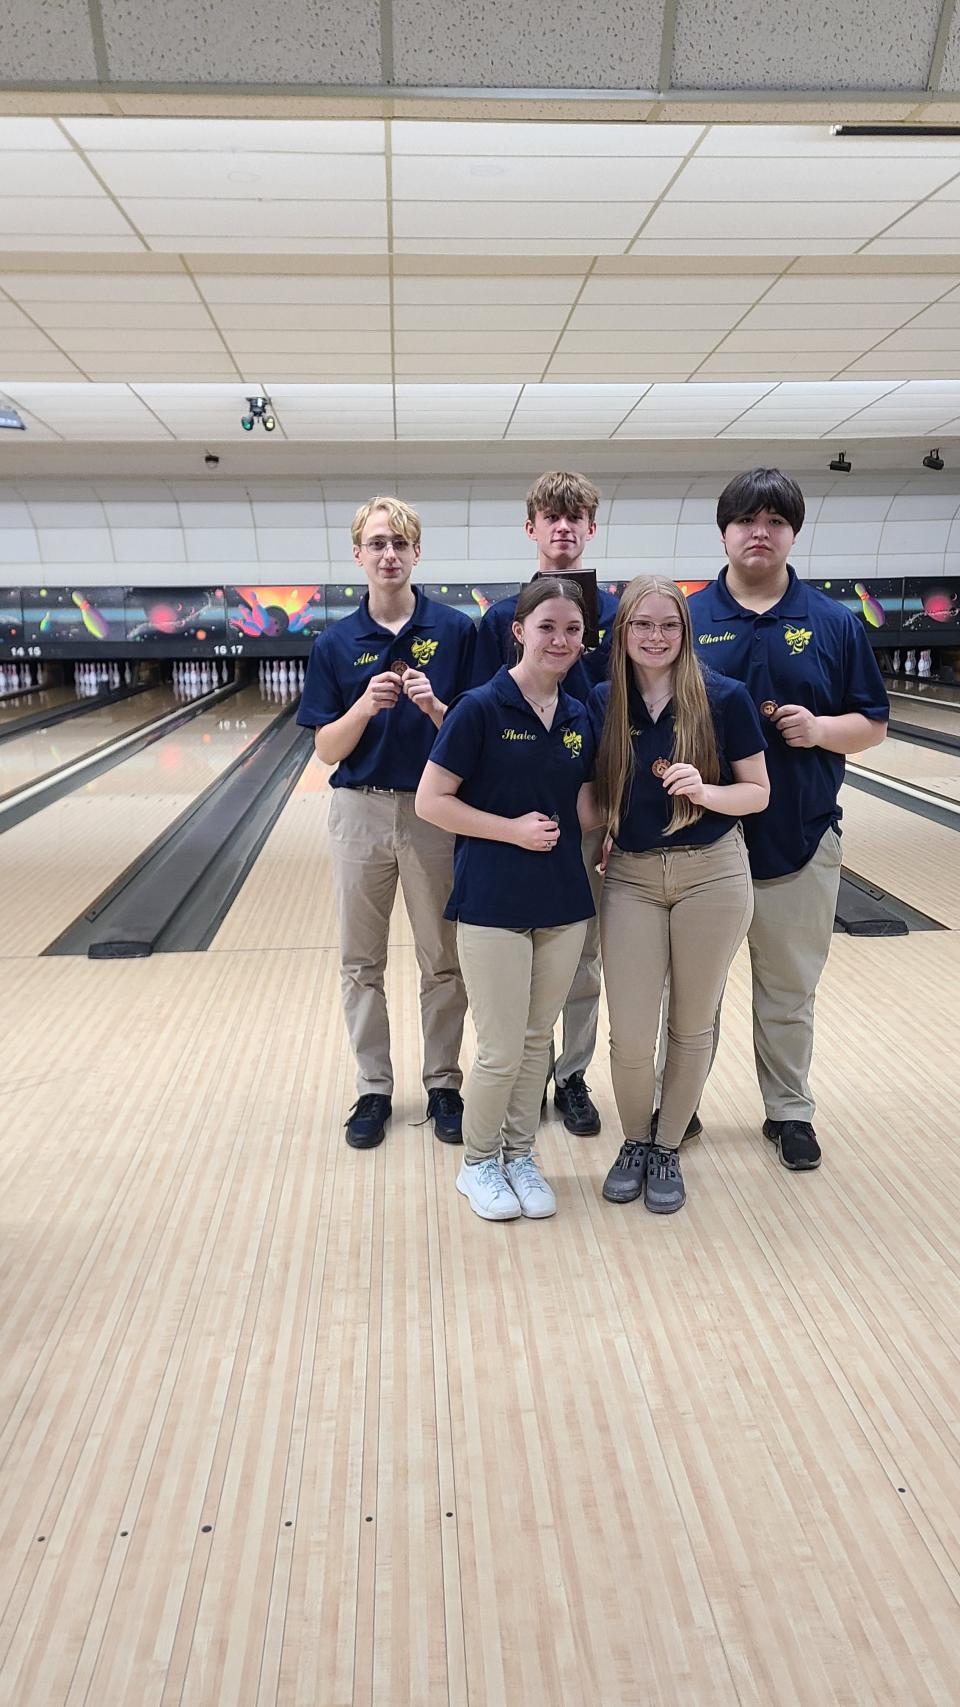 The Hornet bowling team's medalists at the Wildcat Blastoff tournament: (back row) Alex Portteus, Nolan Grant and Charlie Teller; (front row) Shalee Van Heerde and Chloe Manifold.